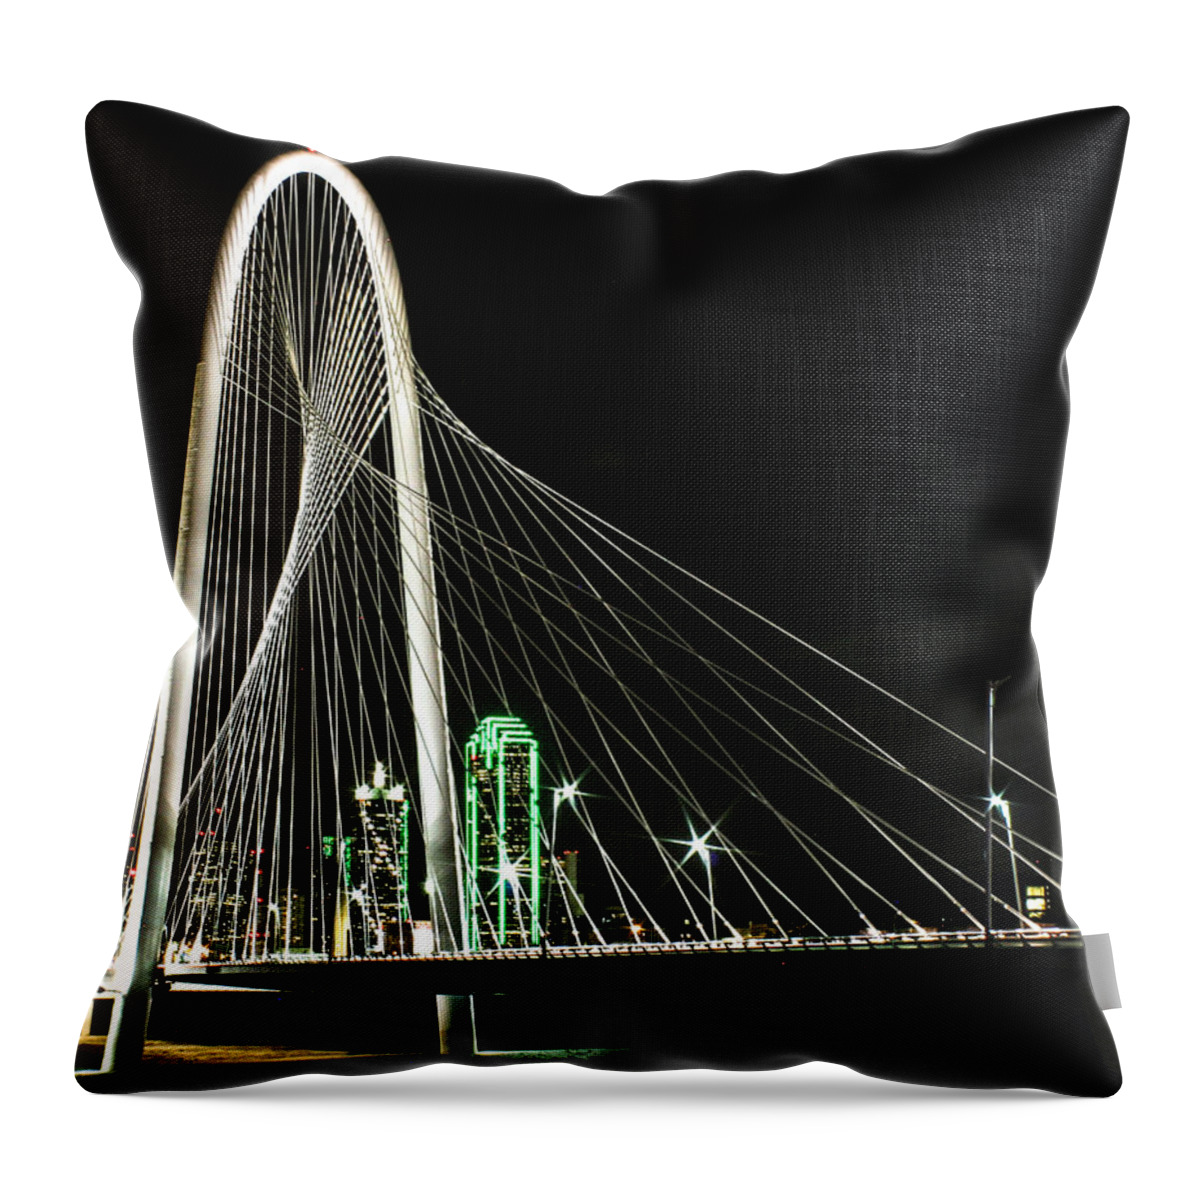 Dallas Throw Pillow featuring the photograph Margaret Hunt Hill Bridge by Jeff Mize